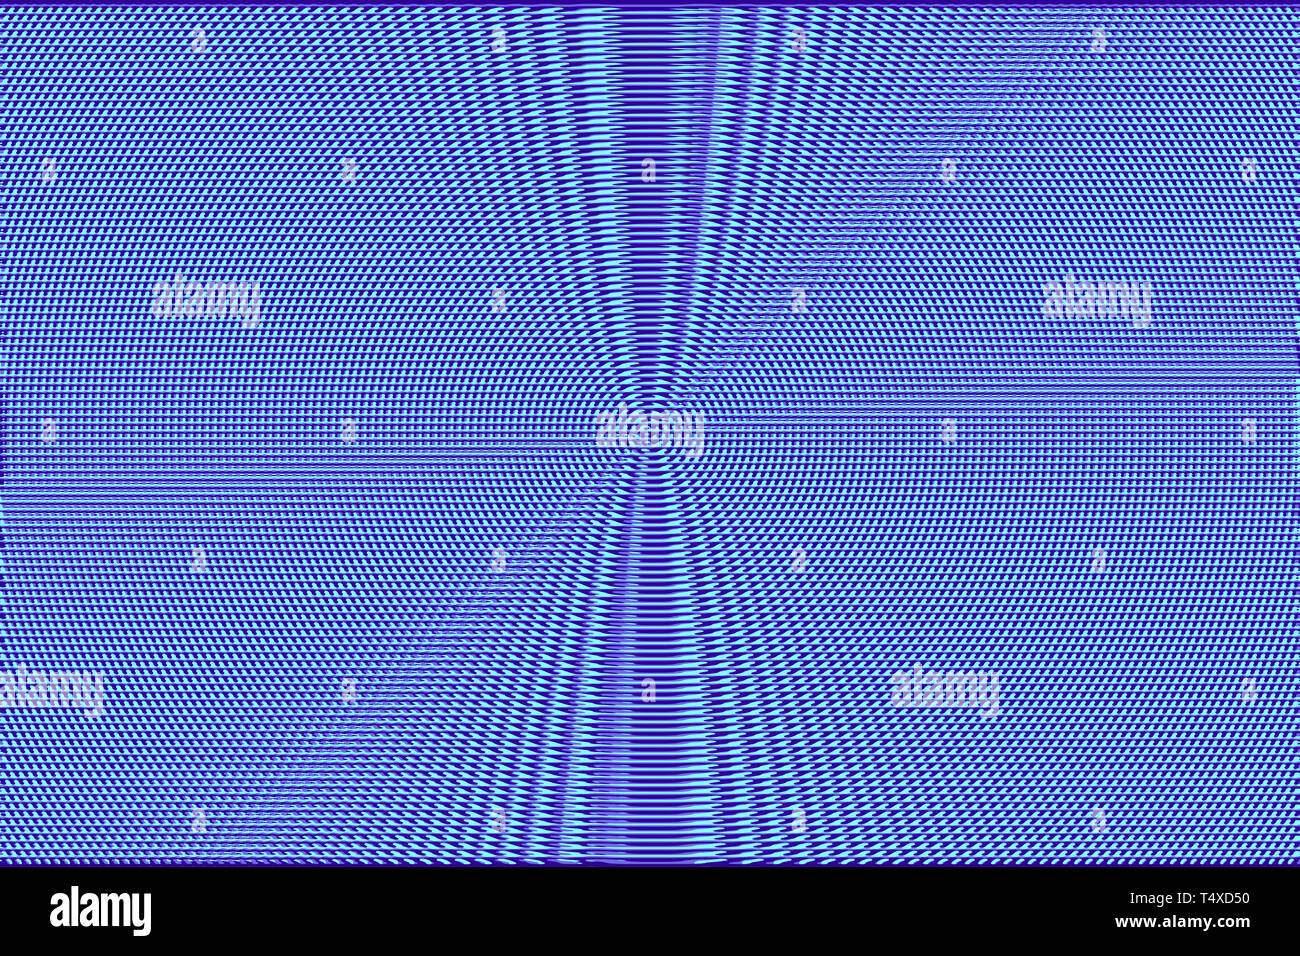 Neon glitch halftone abstract background. Hypnotic optical illusion. Stock Photo